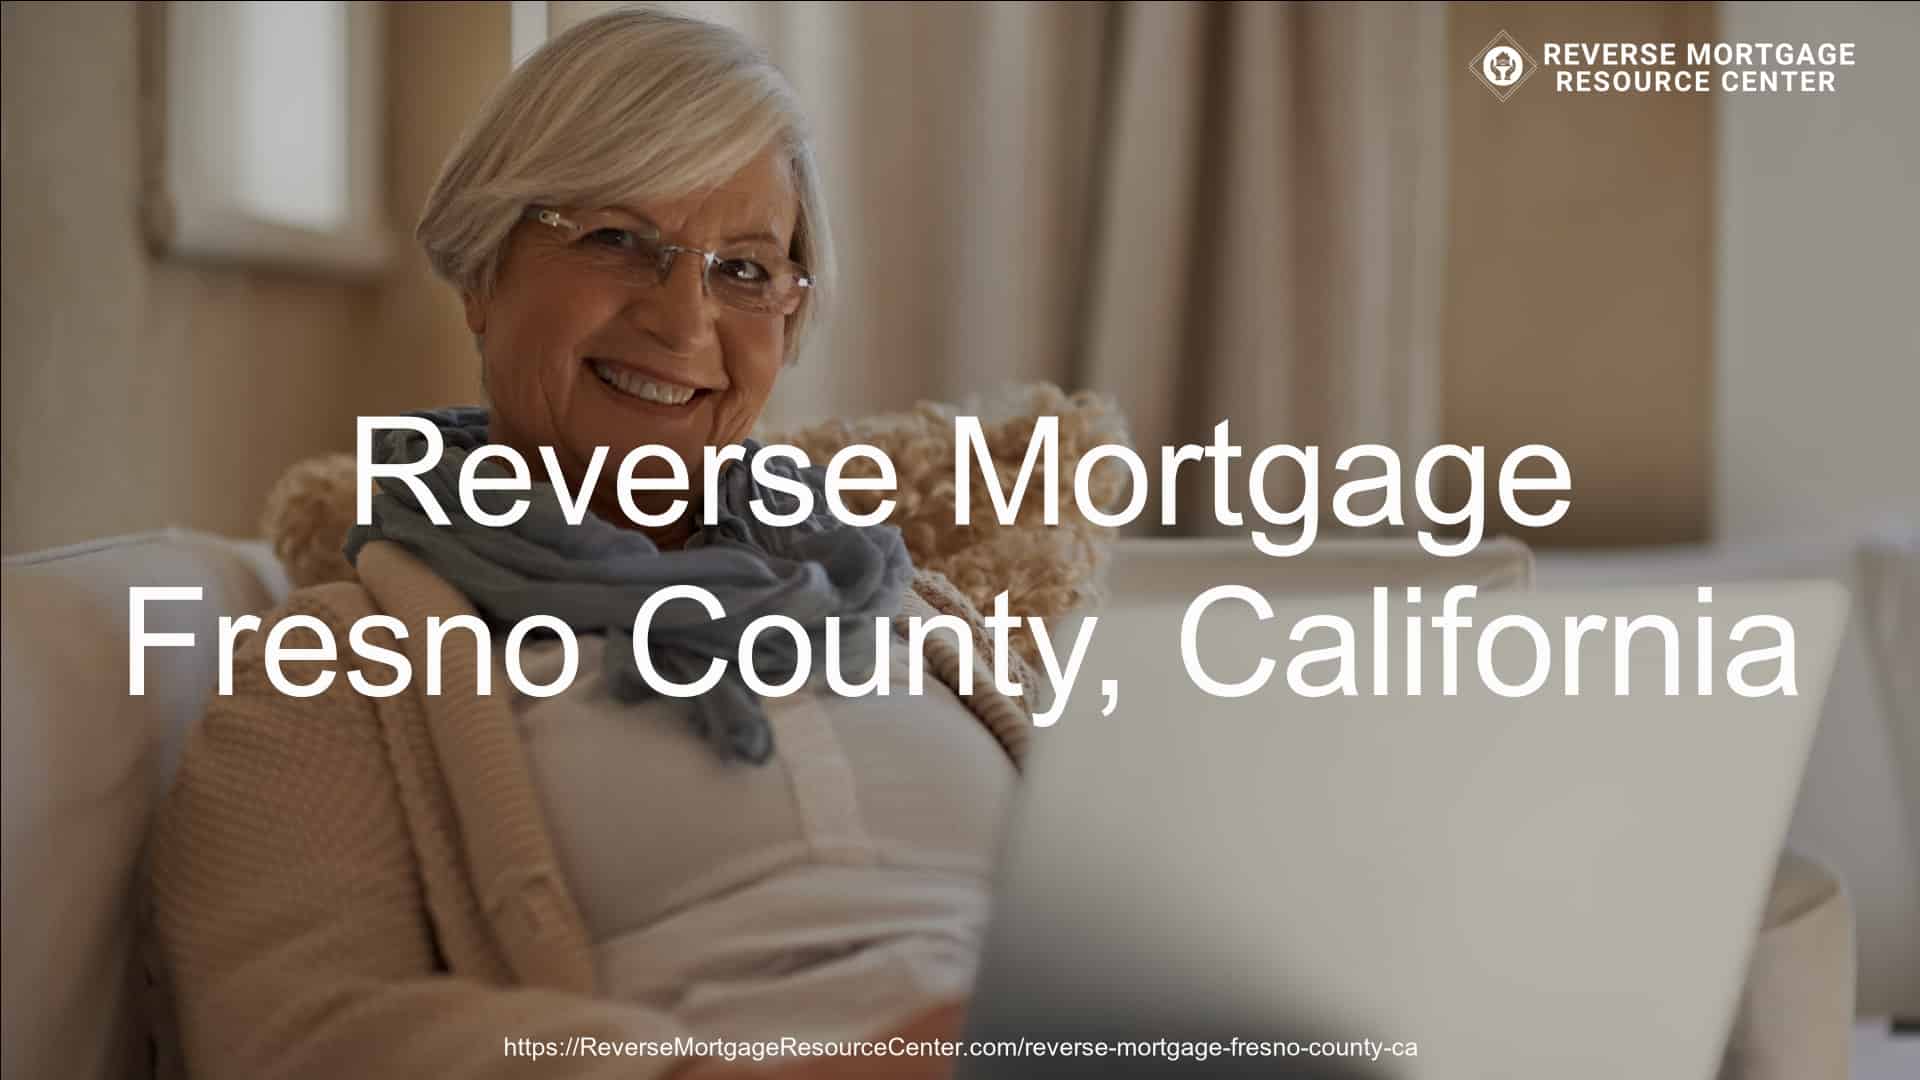 Reverse Mortgage Loans in Fresno County California